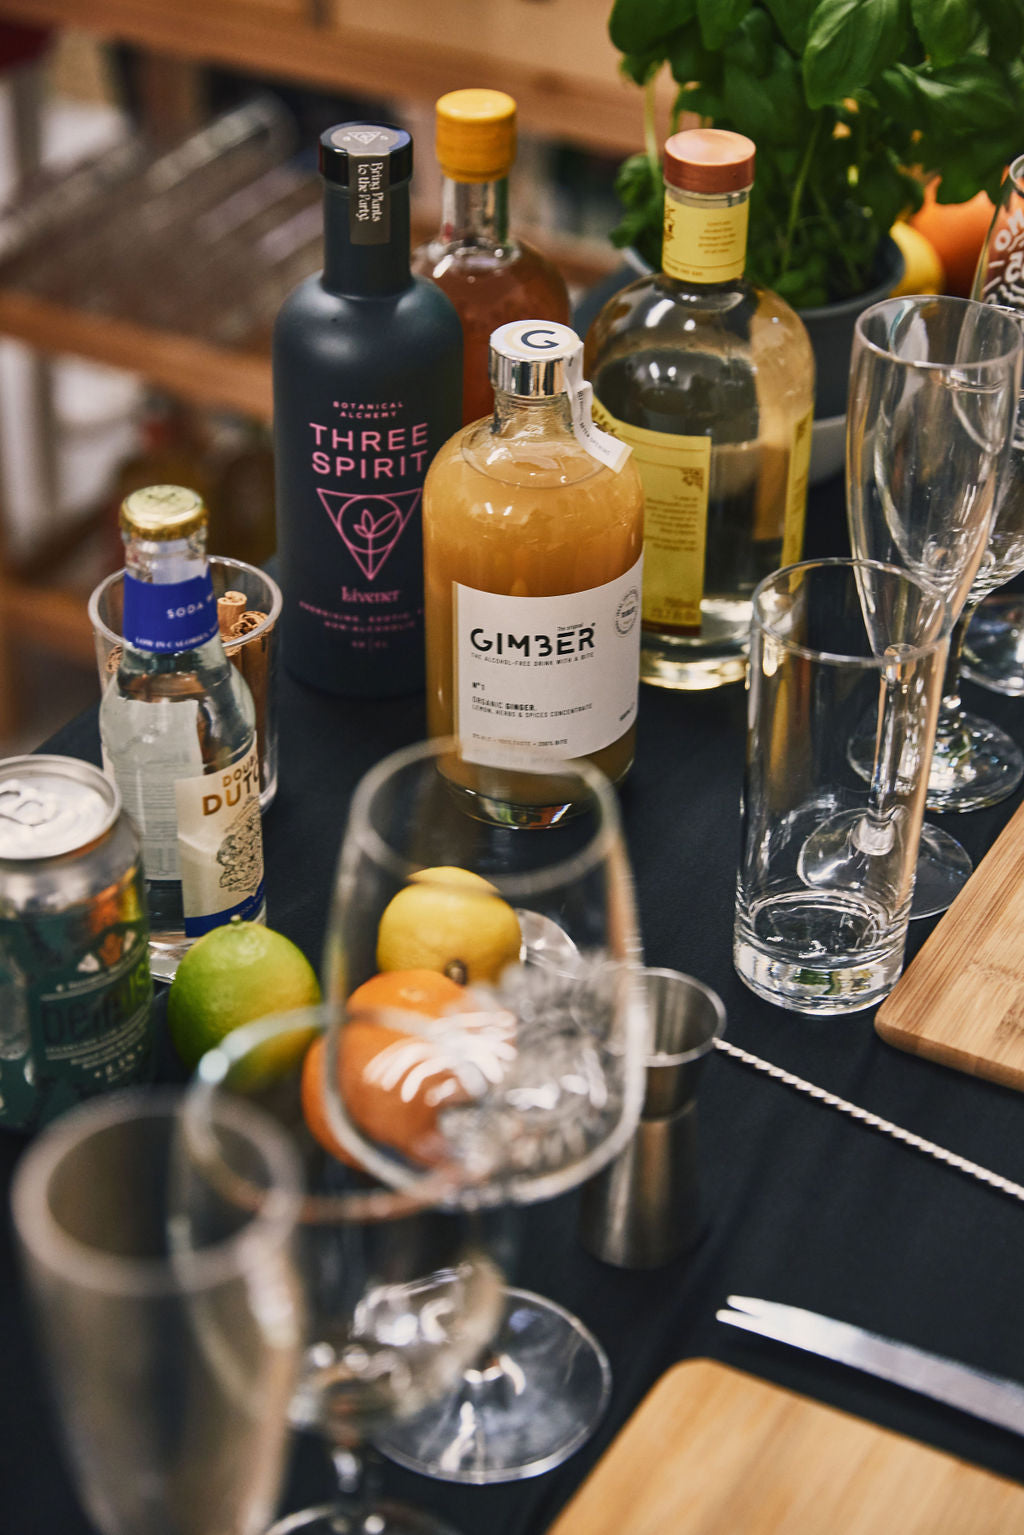 Join Club Soda! Alcohol Free Cocktail Making Class.